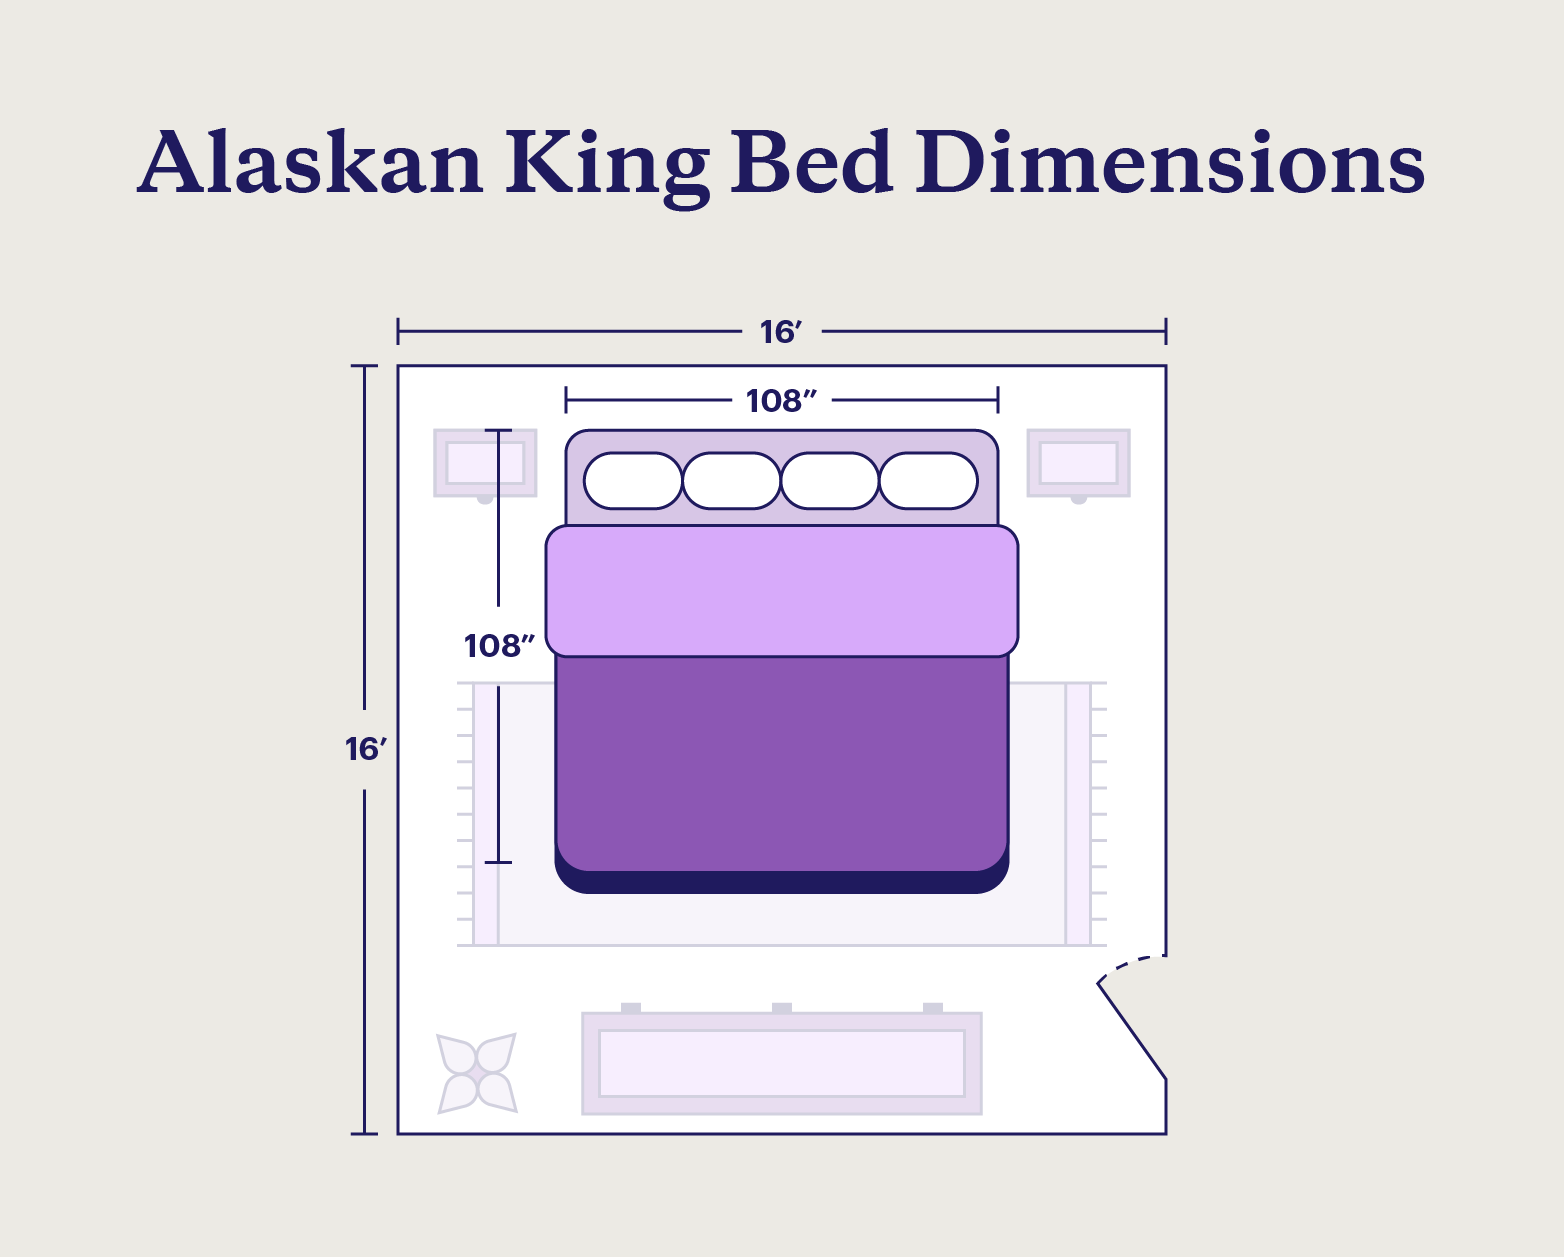 An illustration showing the Alaskan king bed dimensions and its ideal room size.